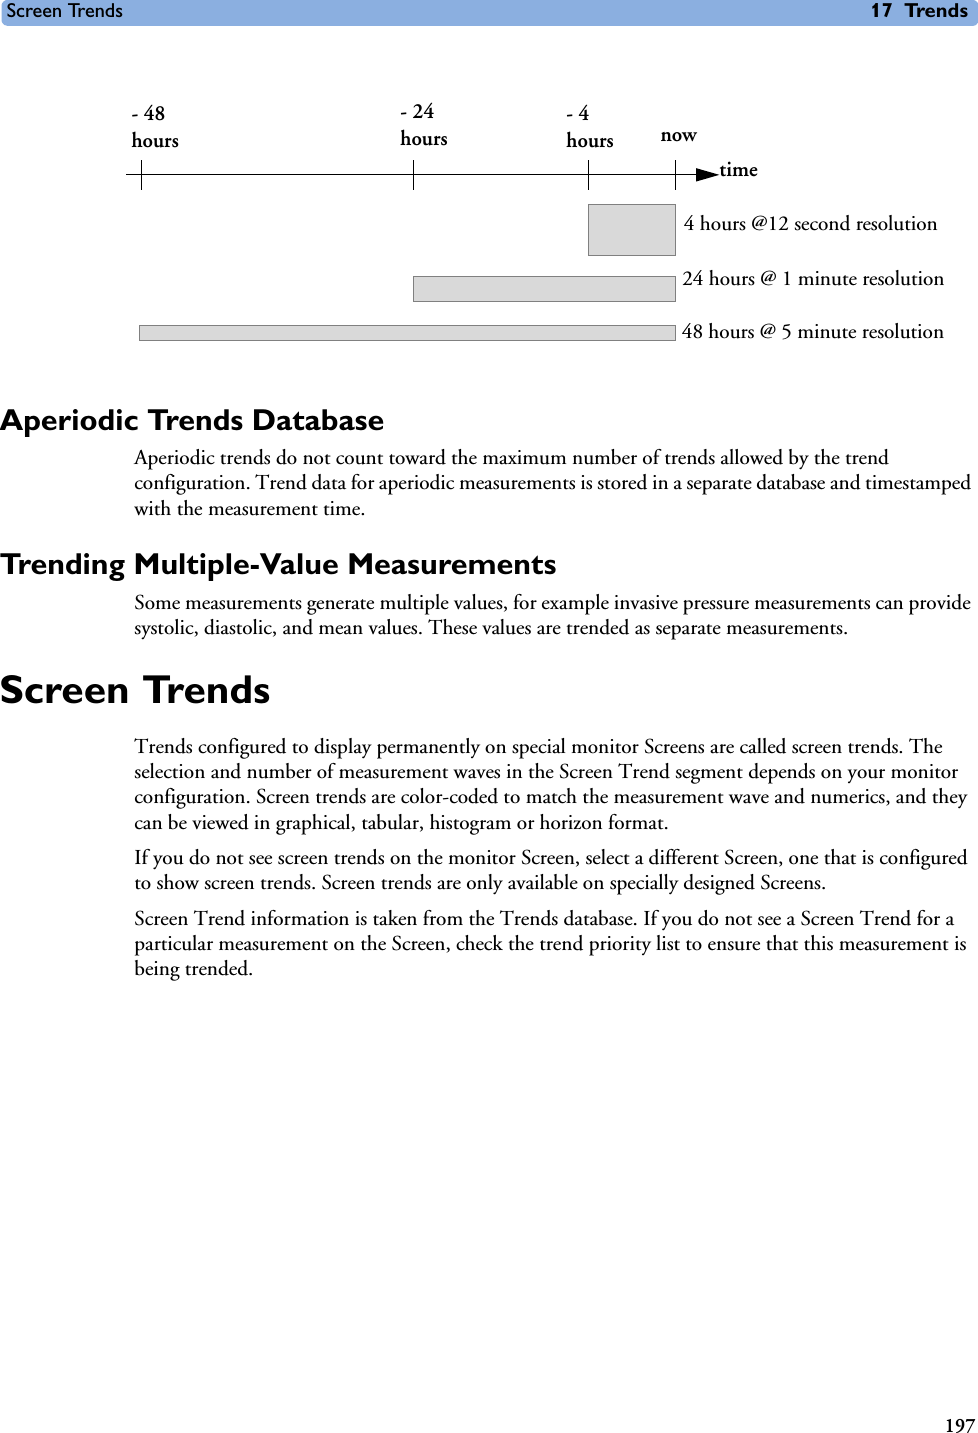 Screen Trends 17 Trends197Aperiodic Trends DatabaseAperiodic trends do not count toward the maximum number of trends allowed by the trend configuration. Trend data for aperiodic measurements is stored in a separate database and timestamped with the measurement time. Trending Multiple-Value MeasurementsSome measurements generate multiple values, for example invasive pressure measurements can provide systolic, diastolic, and mean values. These values are trended as separate measurements.Screen TrendsTrends configured to display permanently on special monitor Screens are called screen trends. The selection and number of measurement waves in the Screen Trend segment depends on your monitor configuration. Screen trends are color-coded to match the measurement wave and numerics, and they can be viewed in graphical, tabular, histogram or horizon format.If you do not see screen trends on the monitor Screen, select a different Screen, one that is configured to show screen trends. Screen trends are only available on specially designed Screens.Screen Trend information is taken from the Trends database. If you do not see a Screen Trend for a particular measurement on the Screen, check the trend priority list to ensure that this measurement is being trended. - 48 hours- 24 hours- 4 hours nowtime4 hours @12 second resolution24 hours @ 1 minute resolution48 hours @ 5 minute resolution